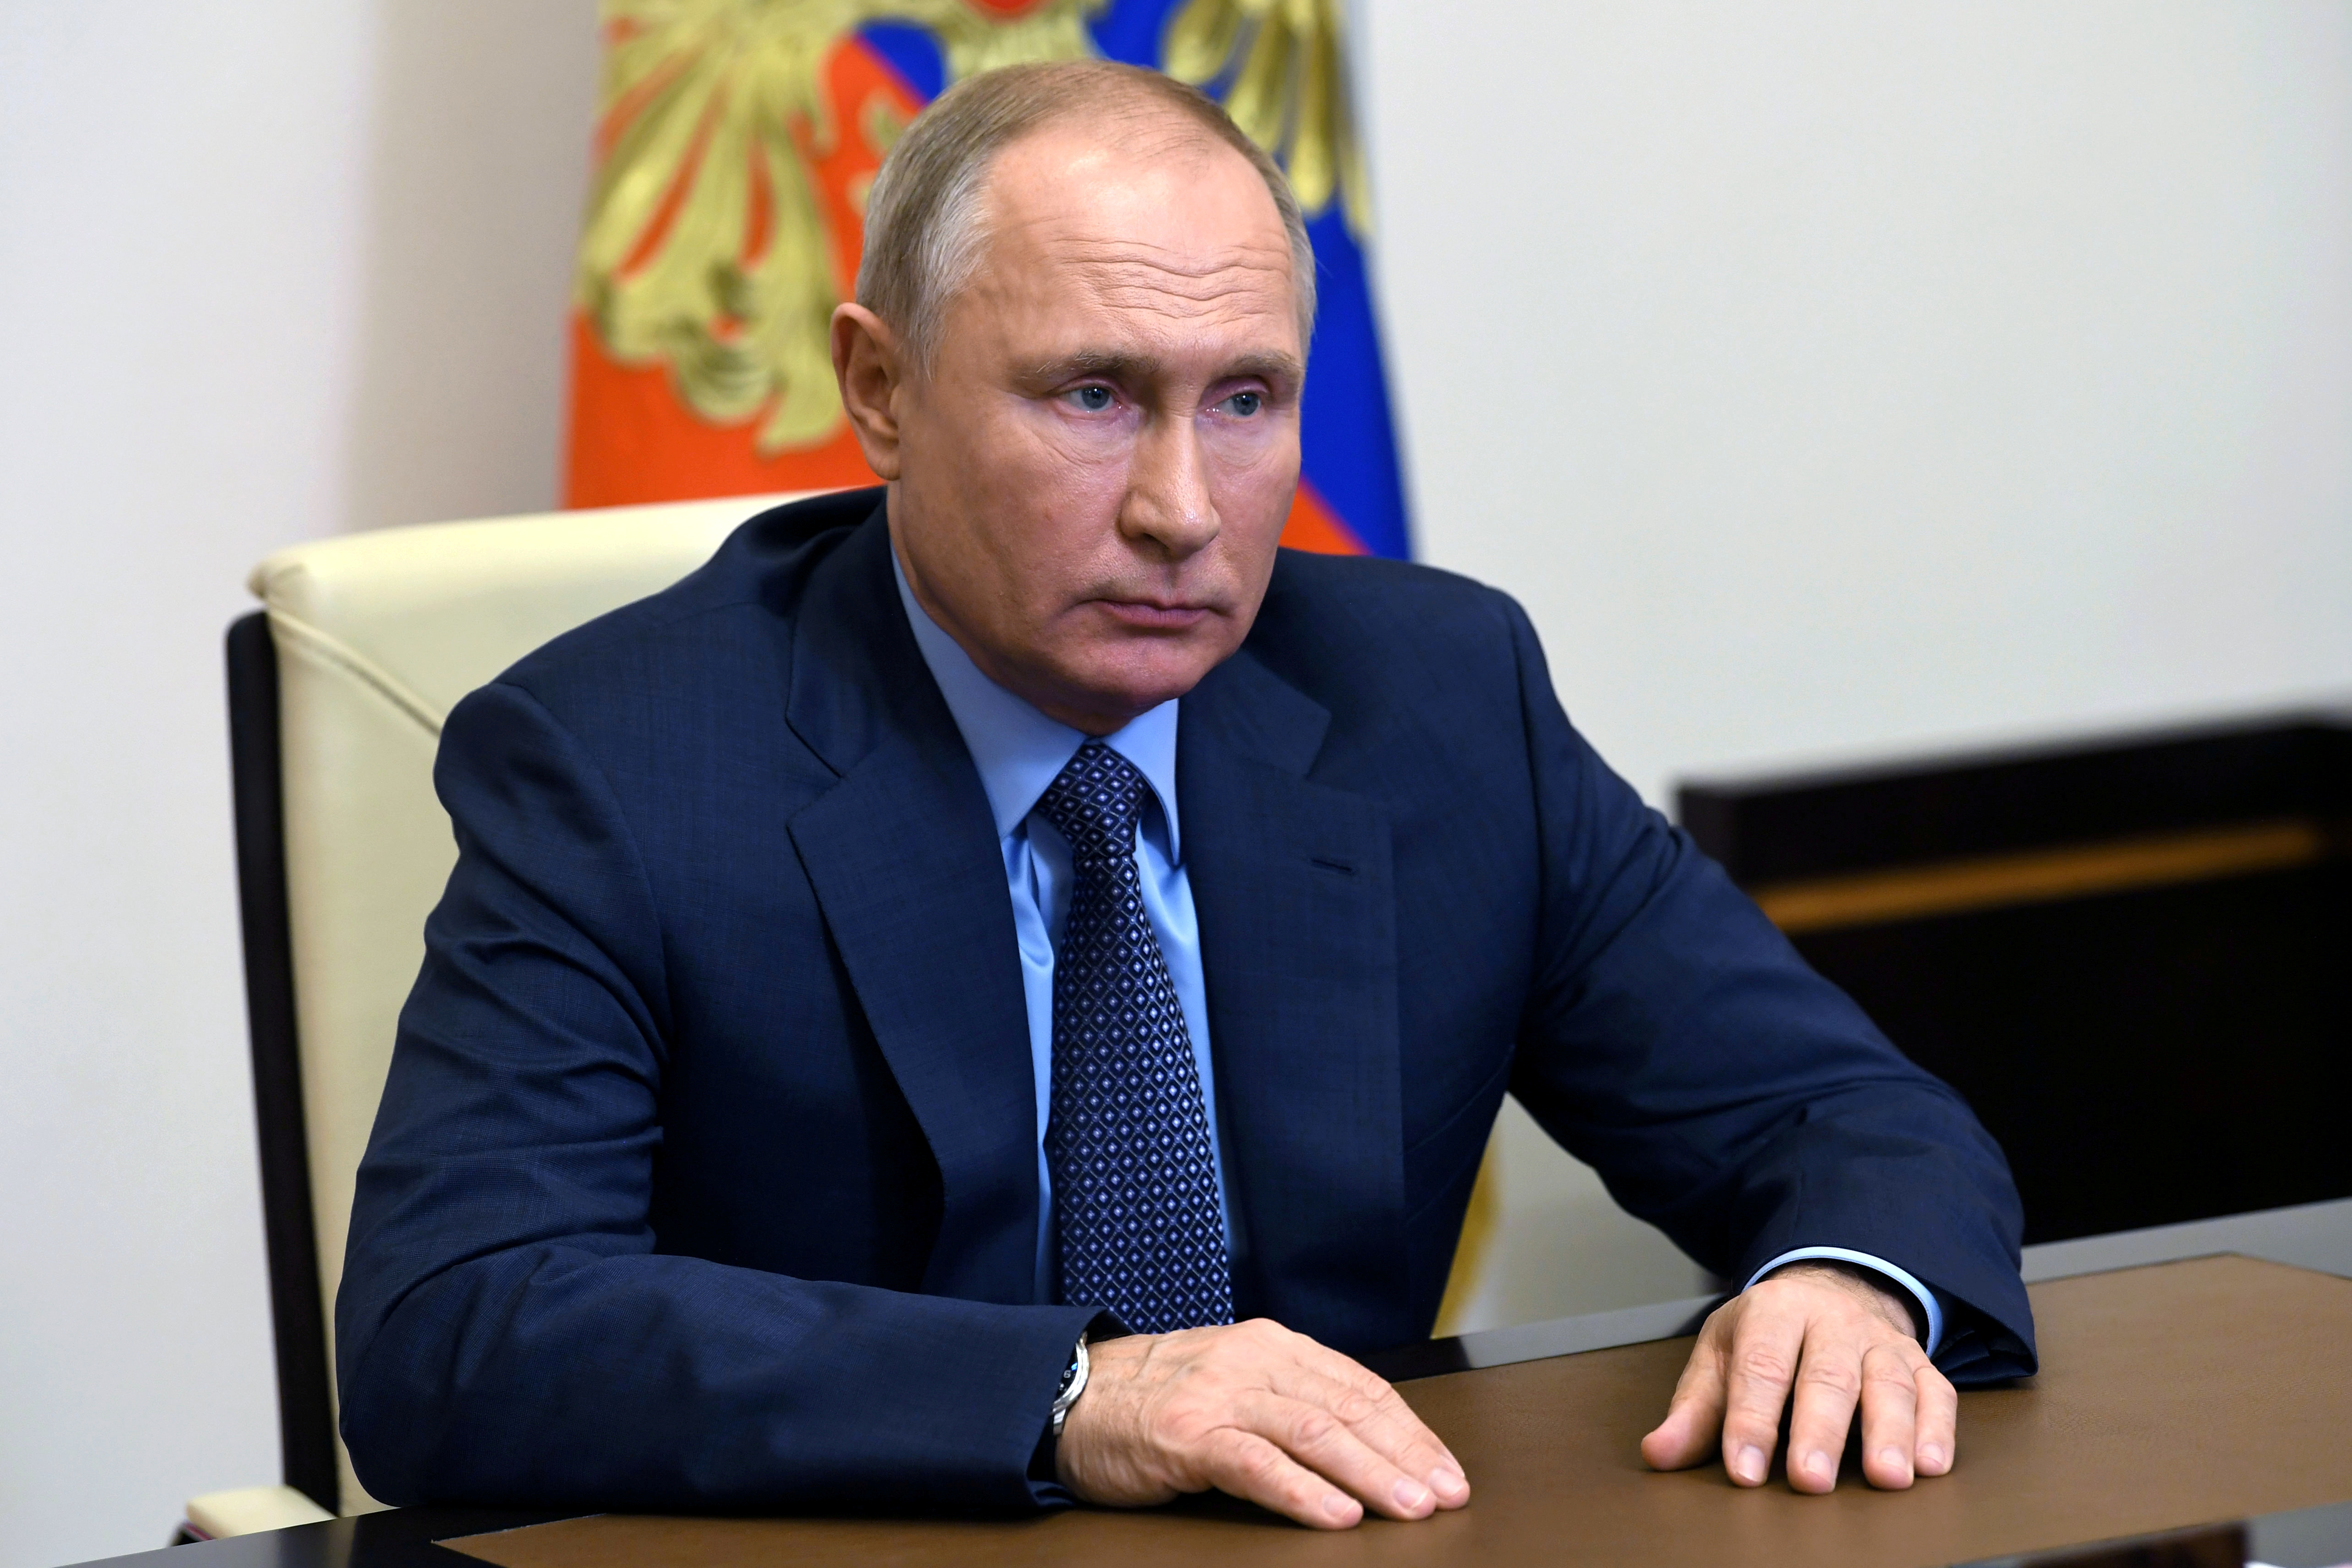 Russian President Vladimir Putin takes part in a video conference at the Novo-Ogaryovo state residence outside Moscow